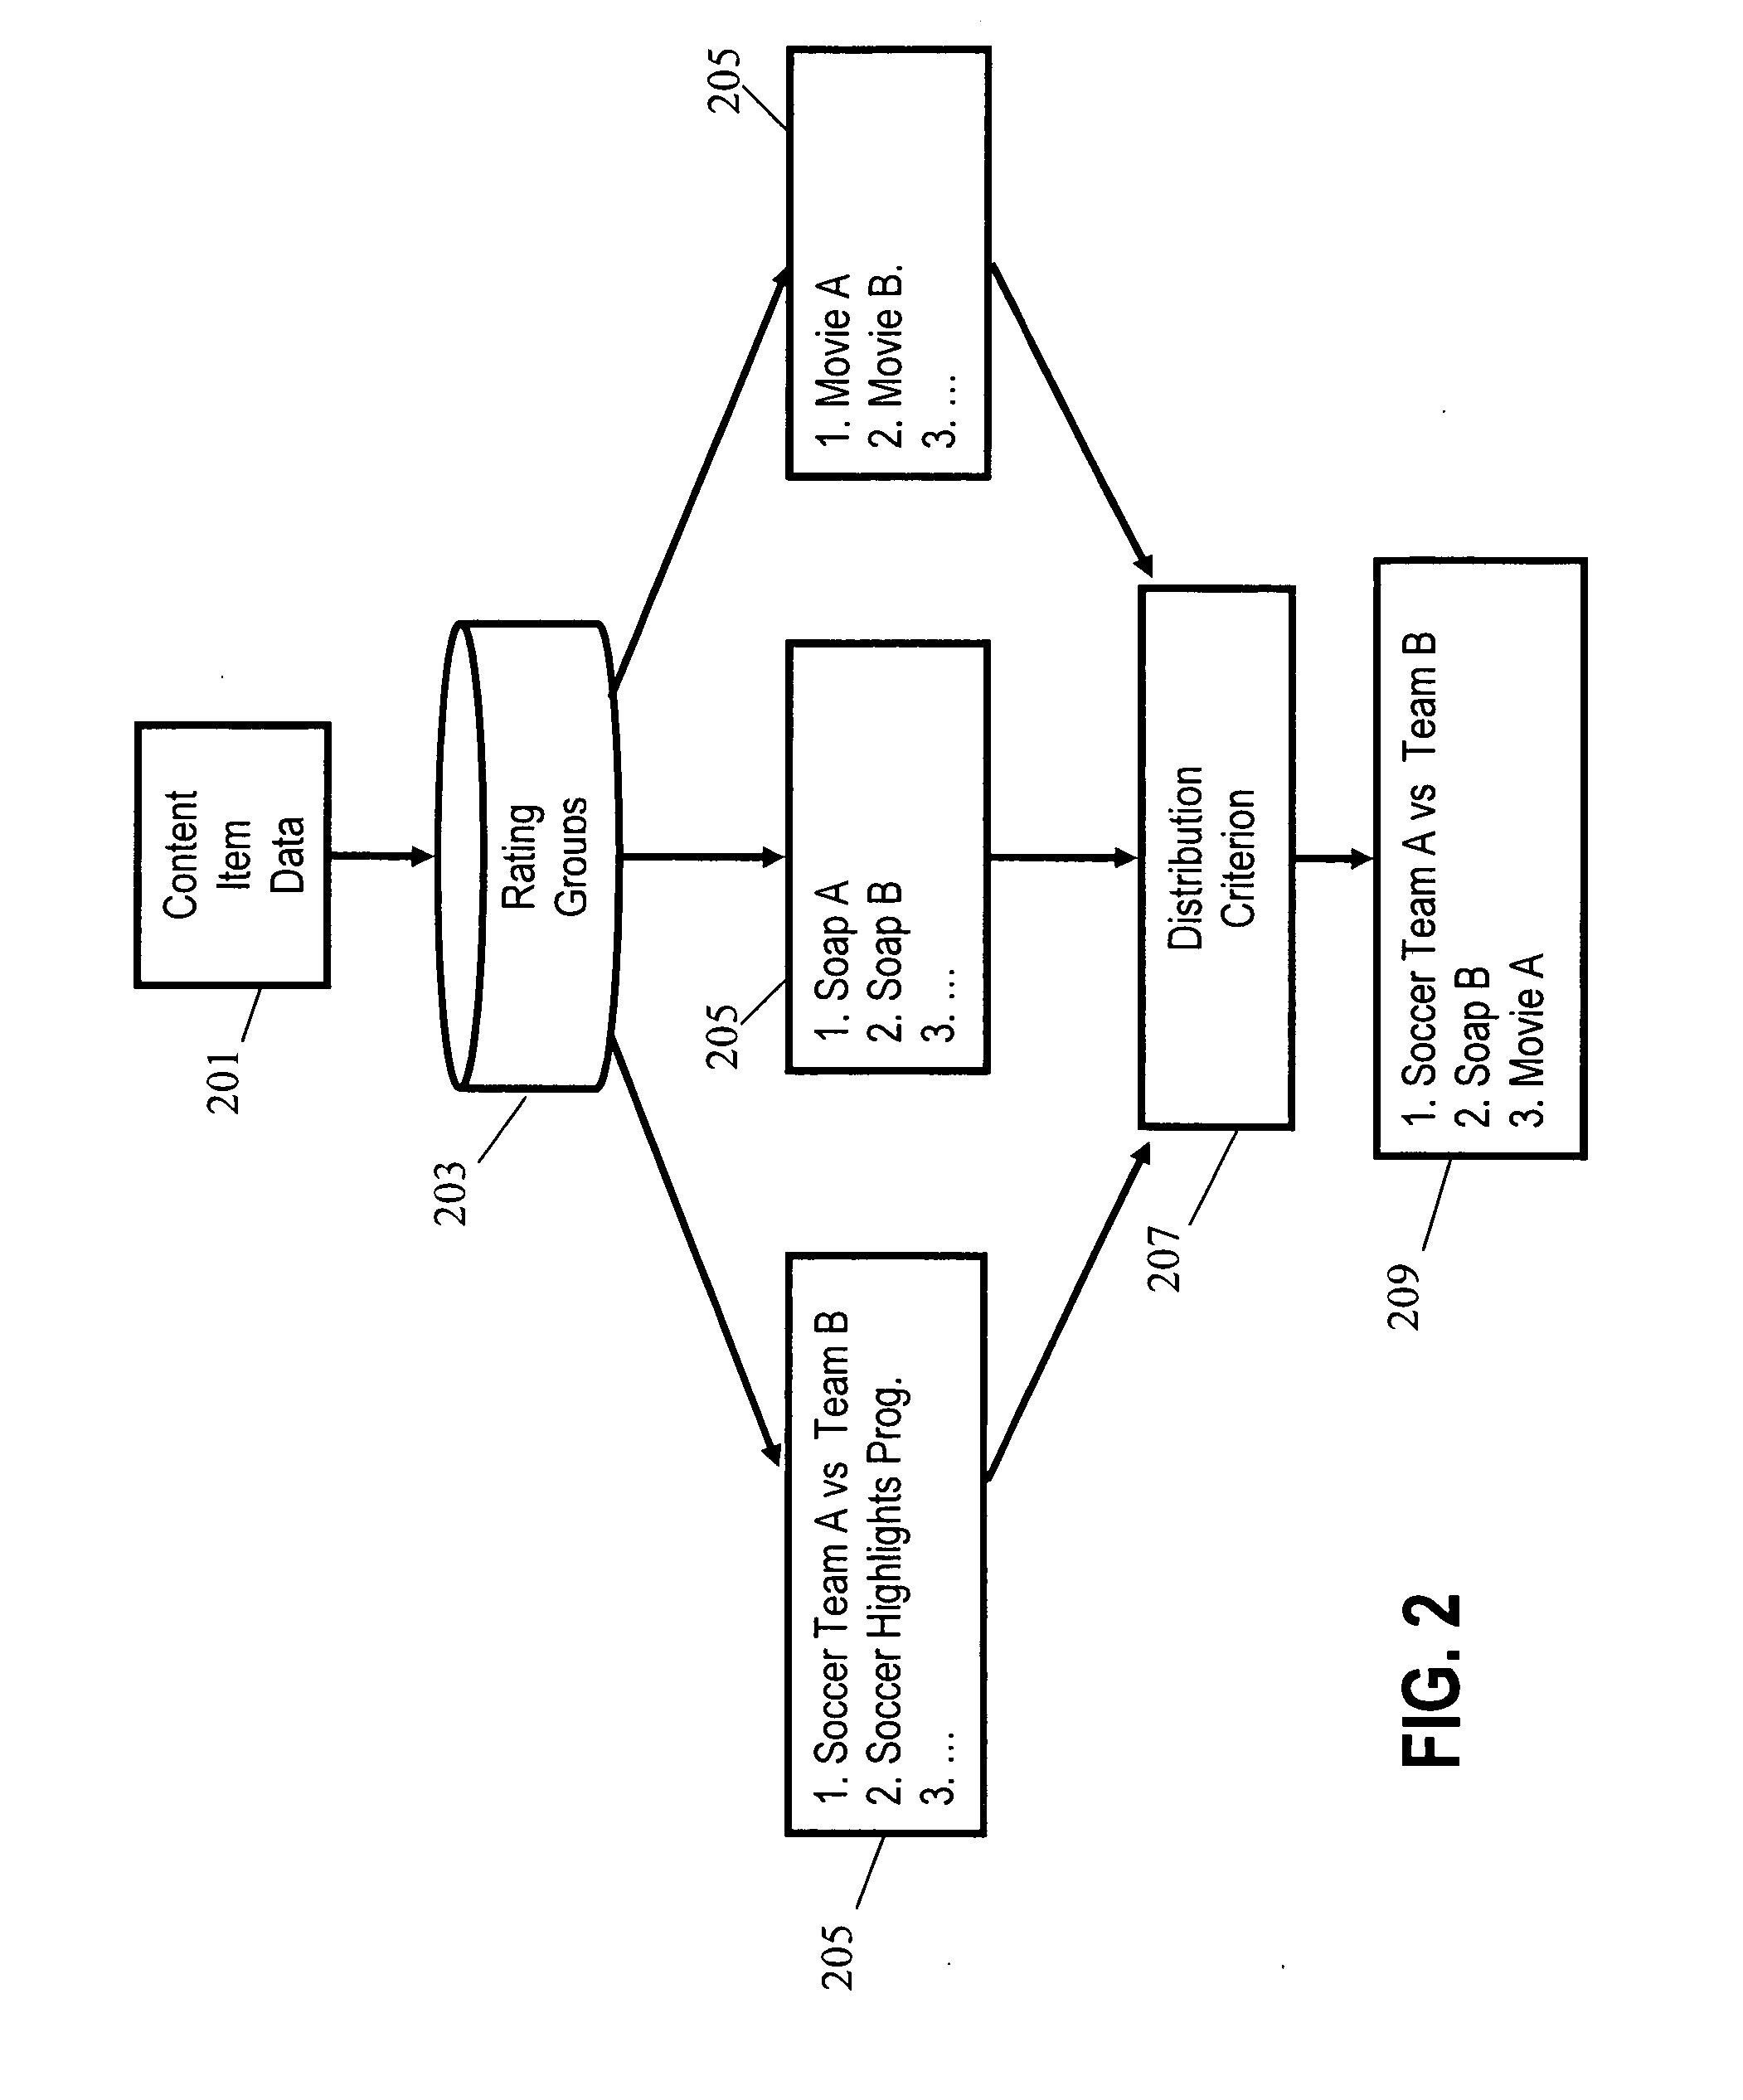 Method and apparatus for content item recommendation